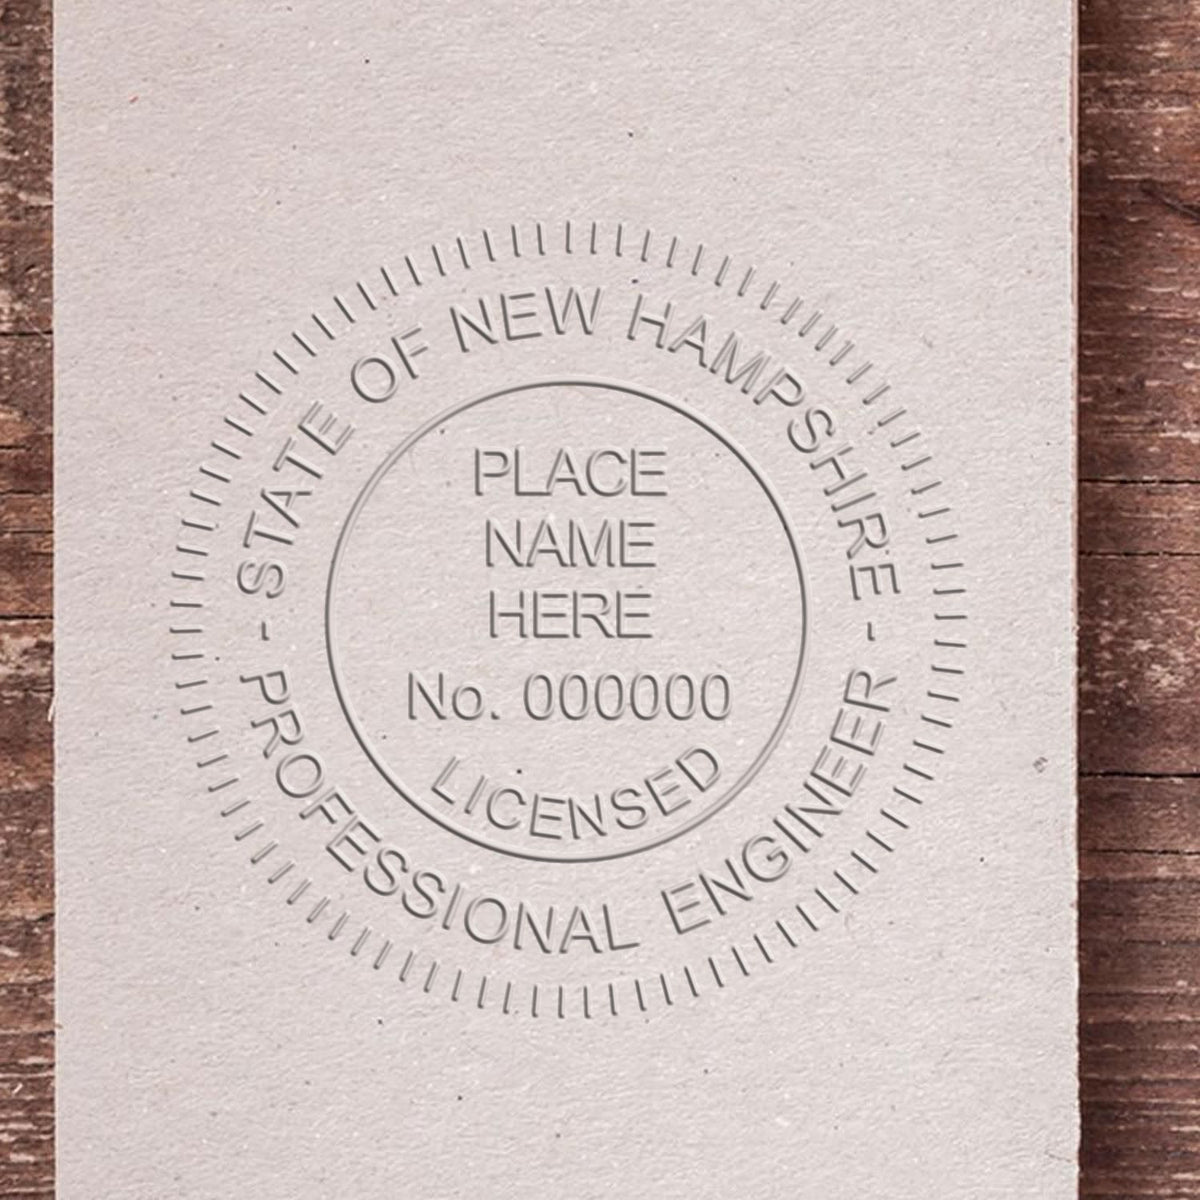 A stamped impression of the Soft New Hampshire Professional Engineer Seal in this stylish lifestyle photo, setting the tone for a unique and personalized product.